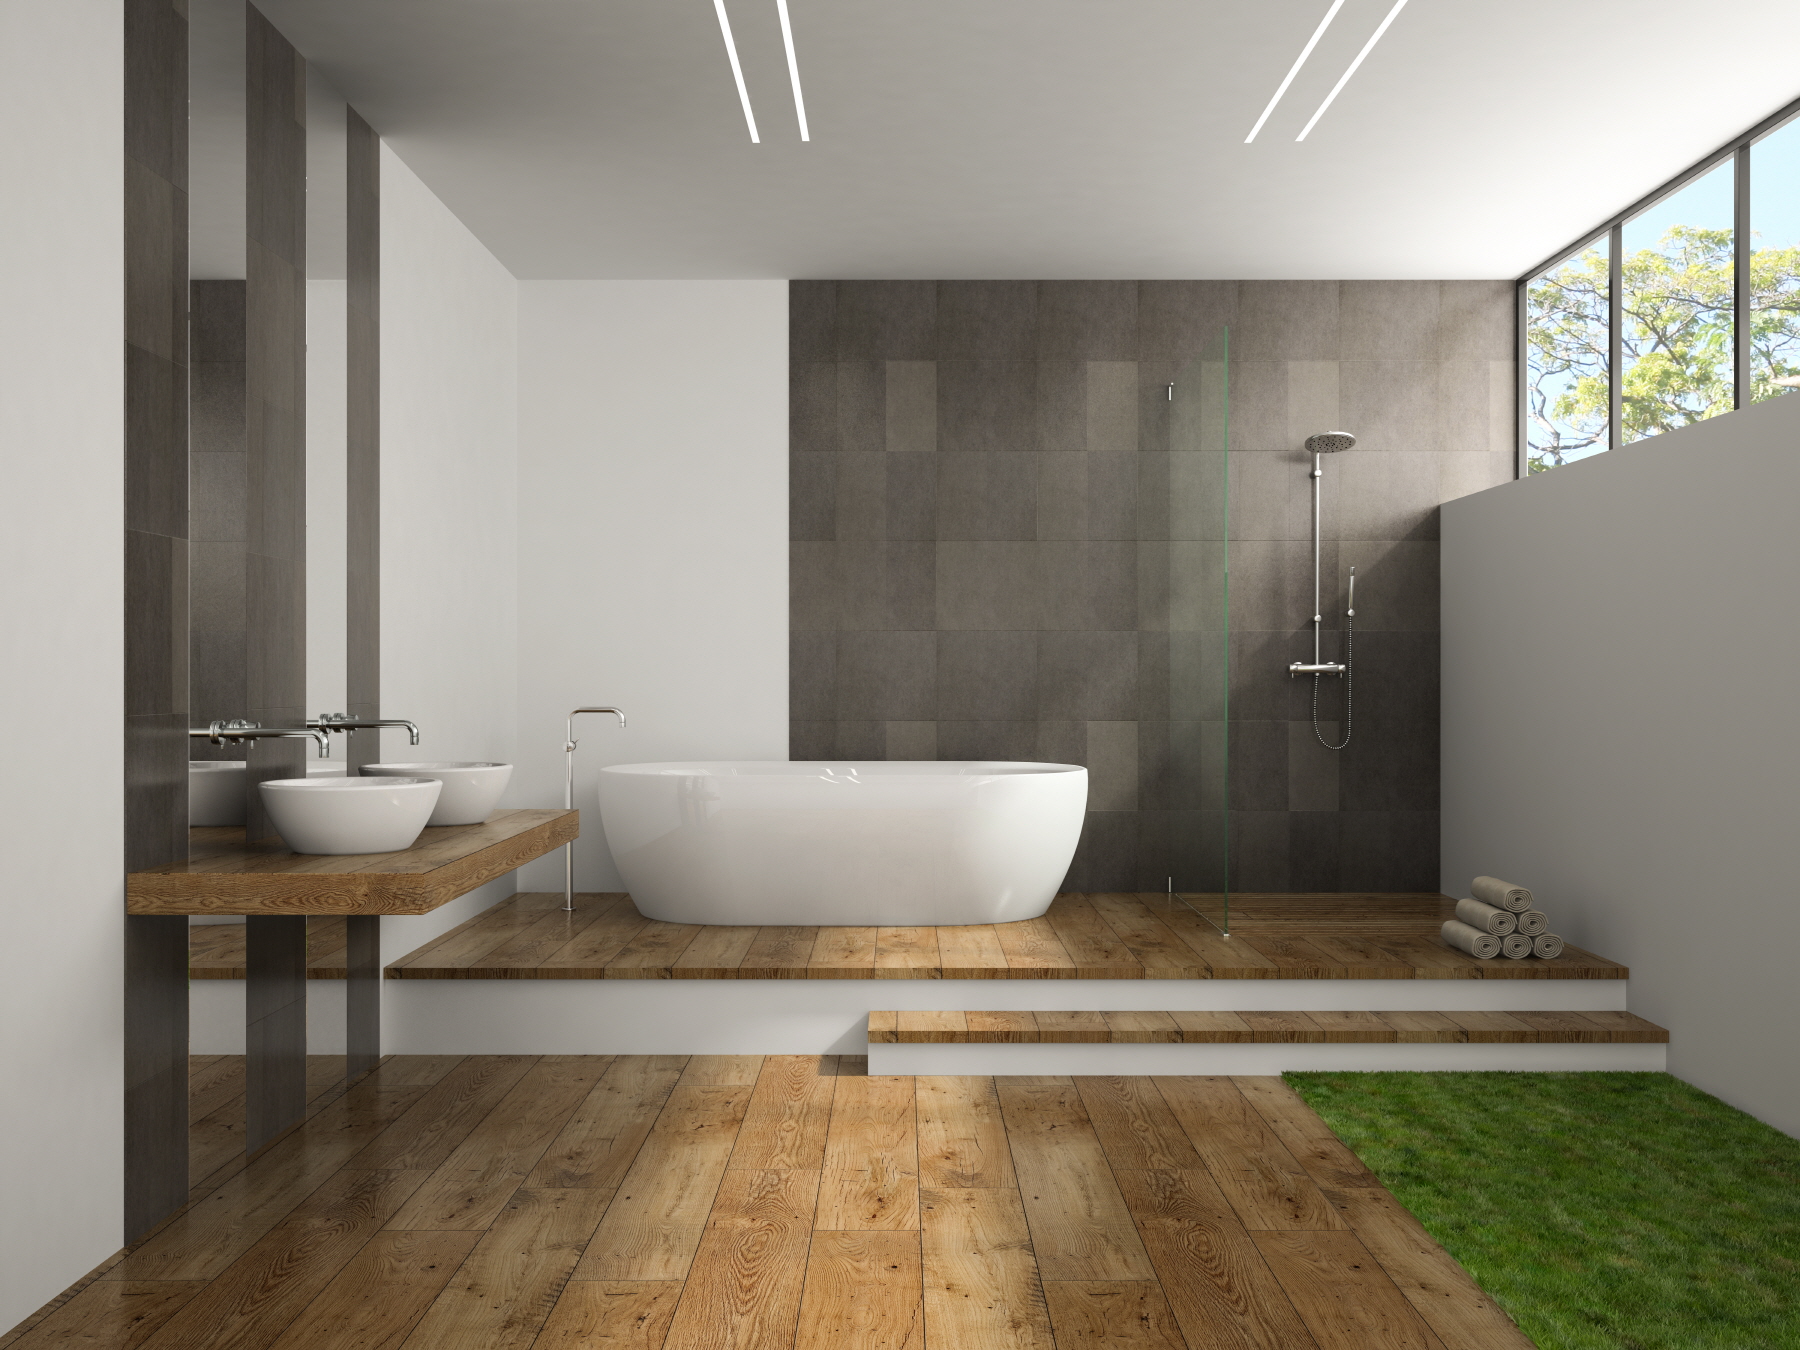 Add dimension to your bathroom with a platform design, creating separate zones using complementary materials for style.